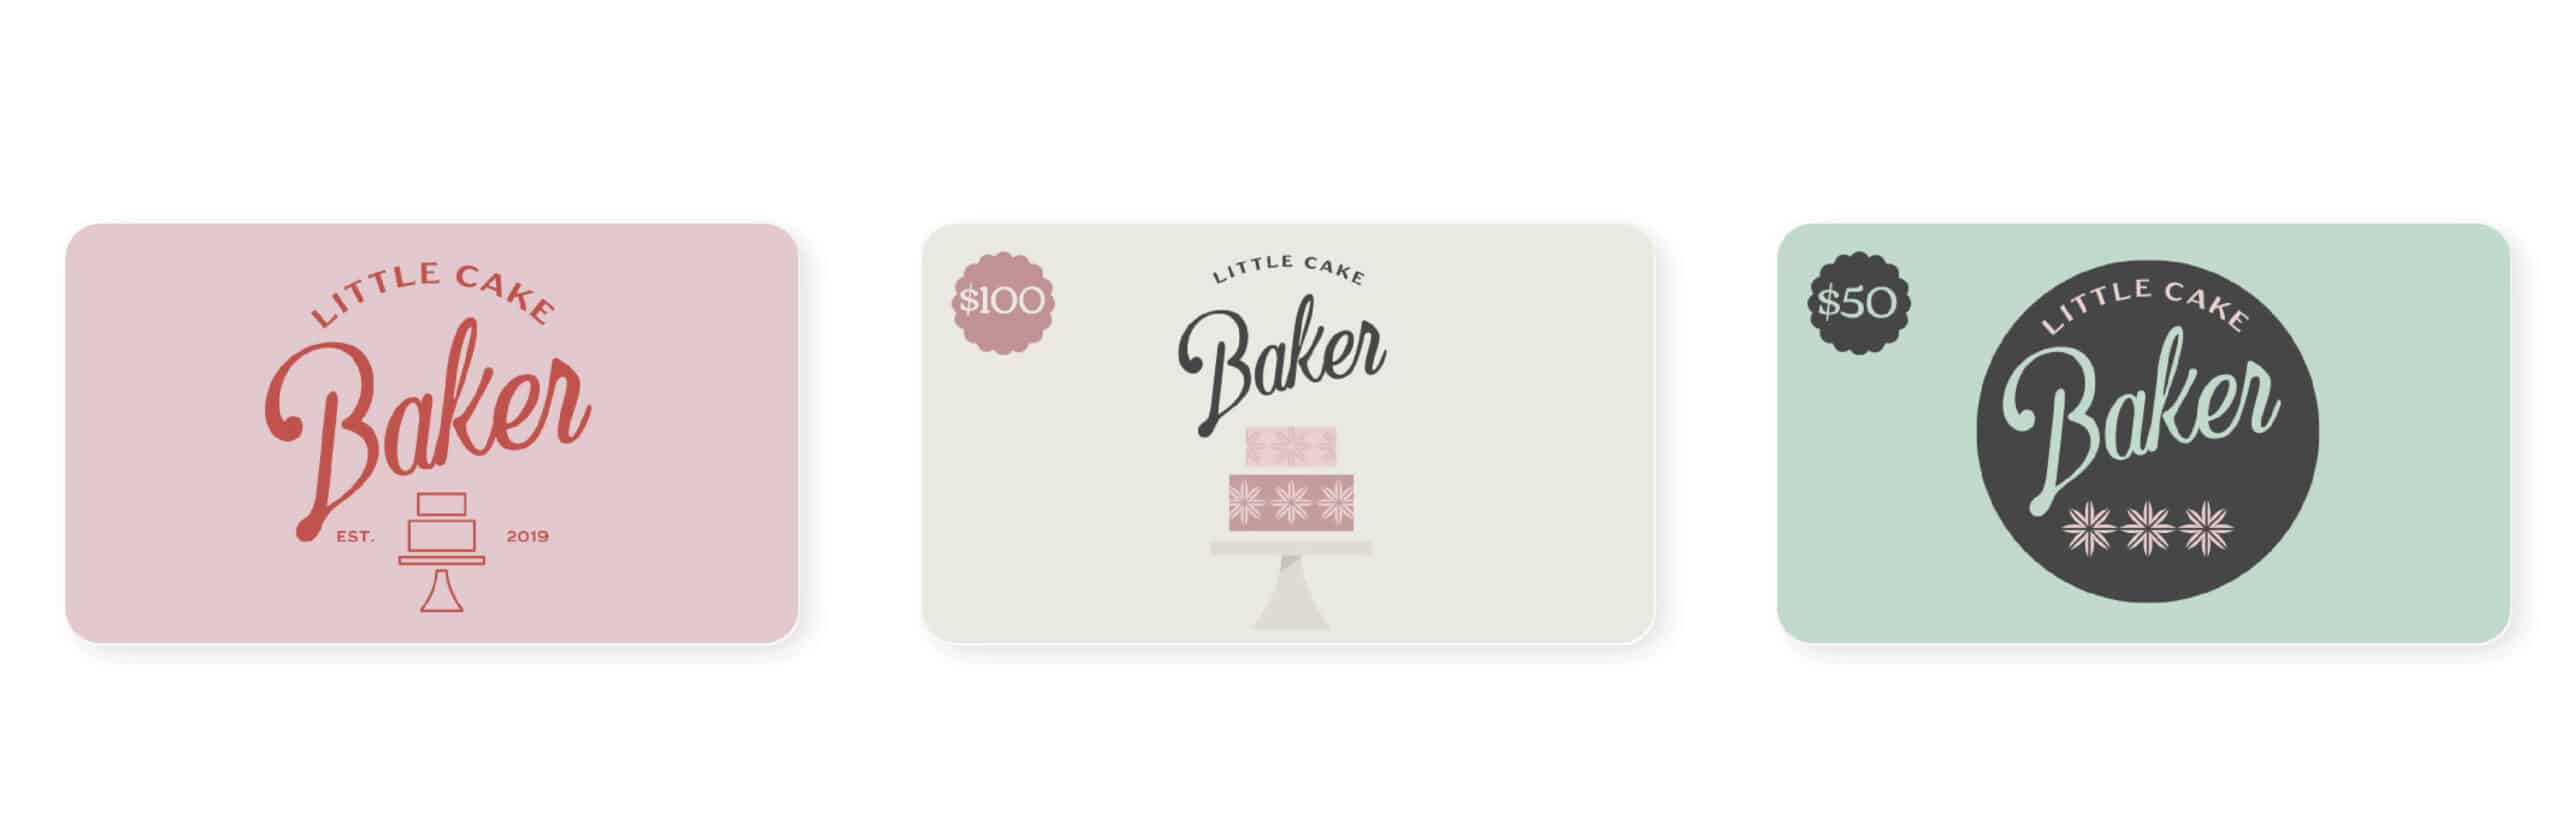 Gift Card Design for Little Cake Baker Brittany Lombardi by Stellen Design branding agency and Logo design firm in Los Angeles California